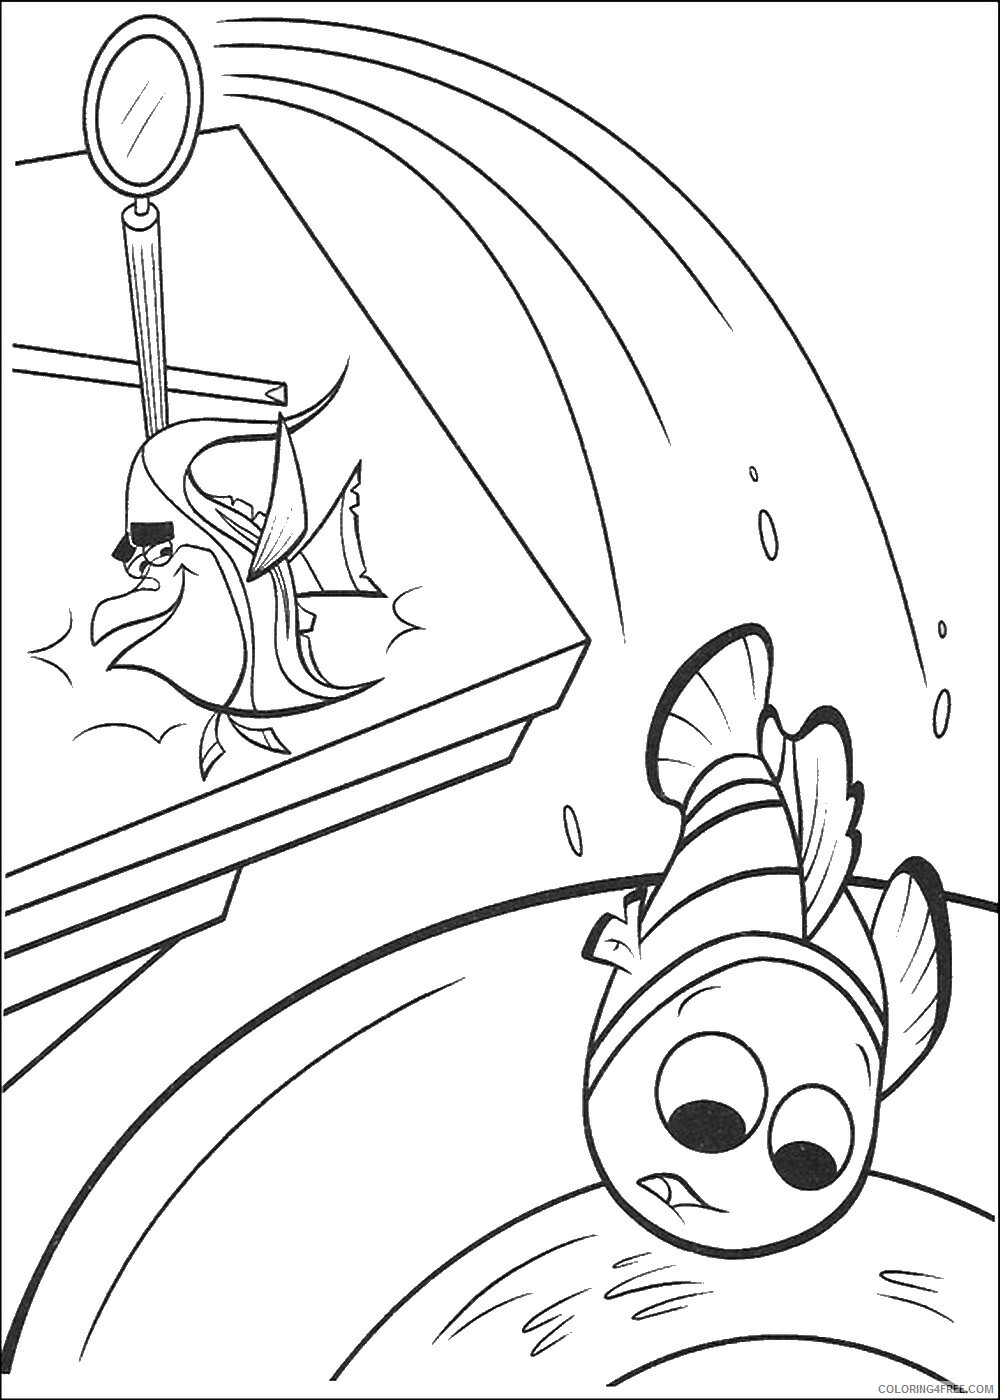 Finding Nemo Coloring Pages TV Film findingnemoc22 Printable 2020 02819 Coloring4free